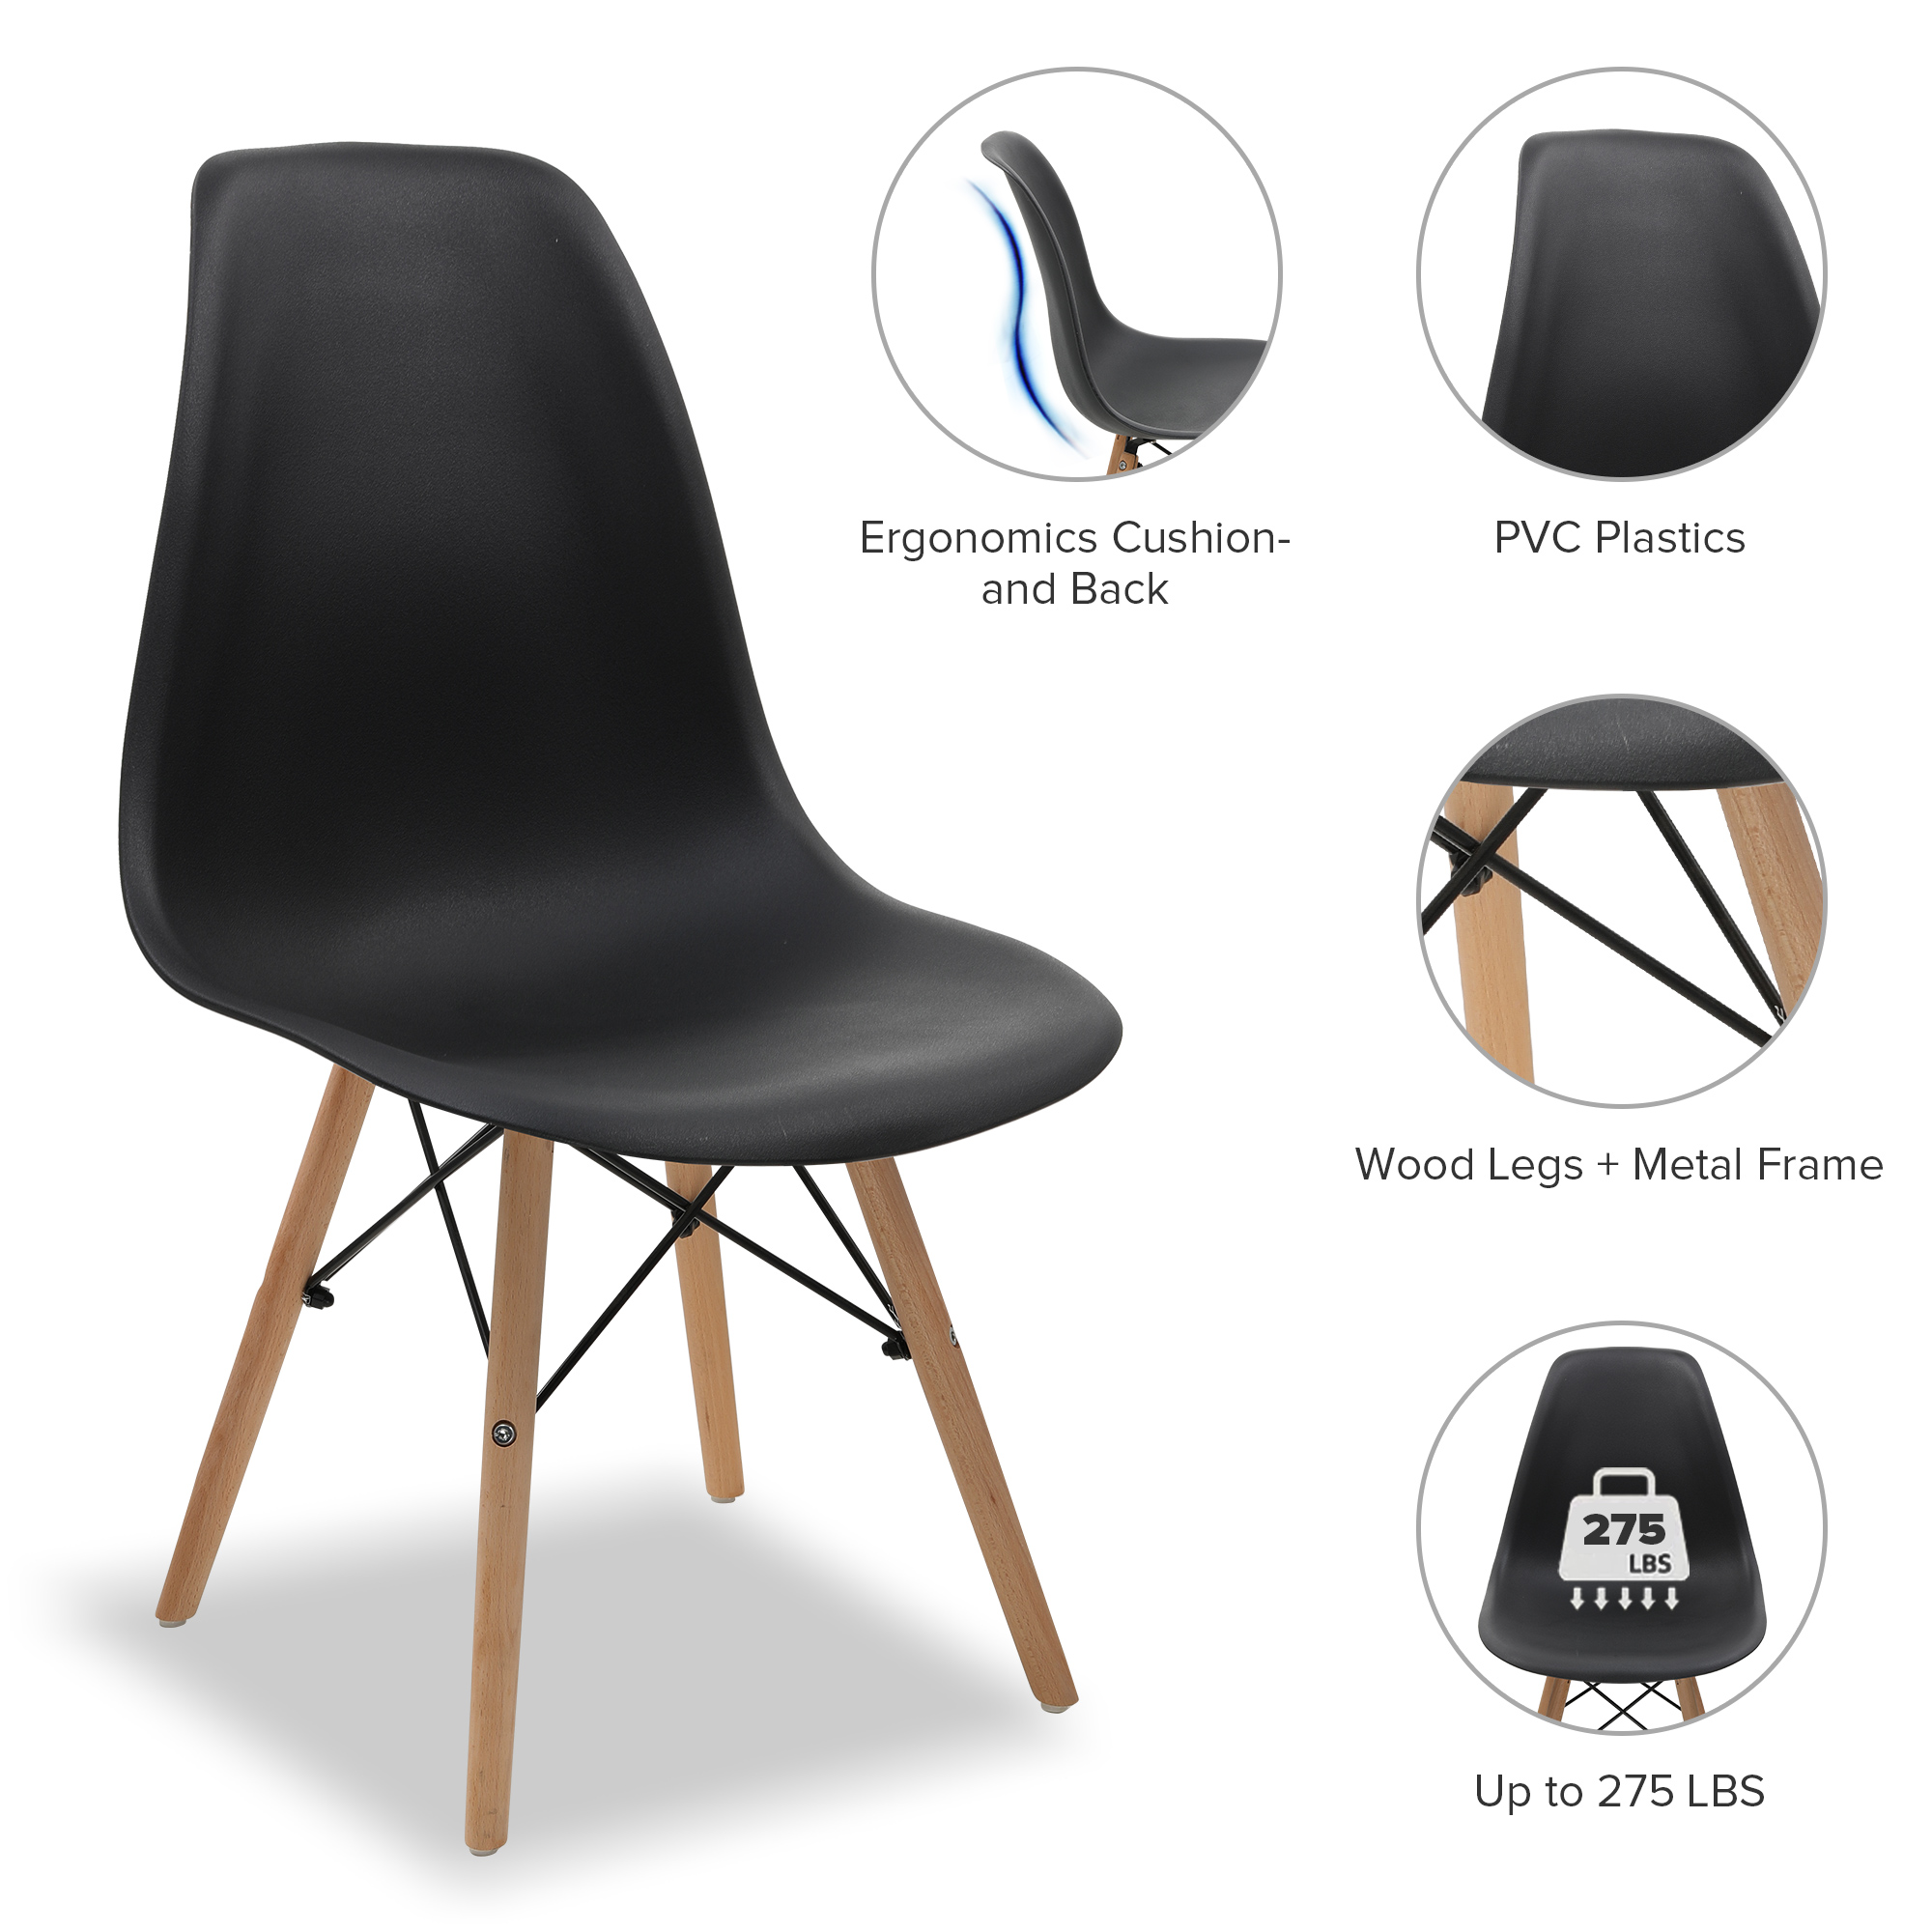 COMHOMA Dining Chair PVC Plastic Lounge Chair Kitchen Dining Room Chair, Black Set of 4 - image 5 of 6